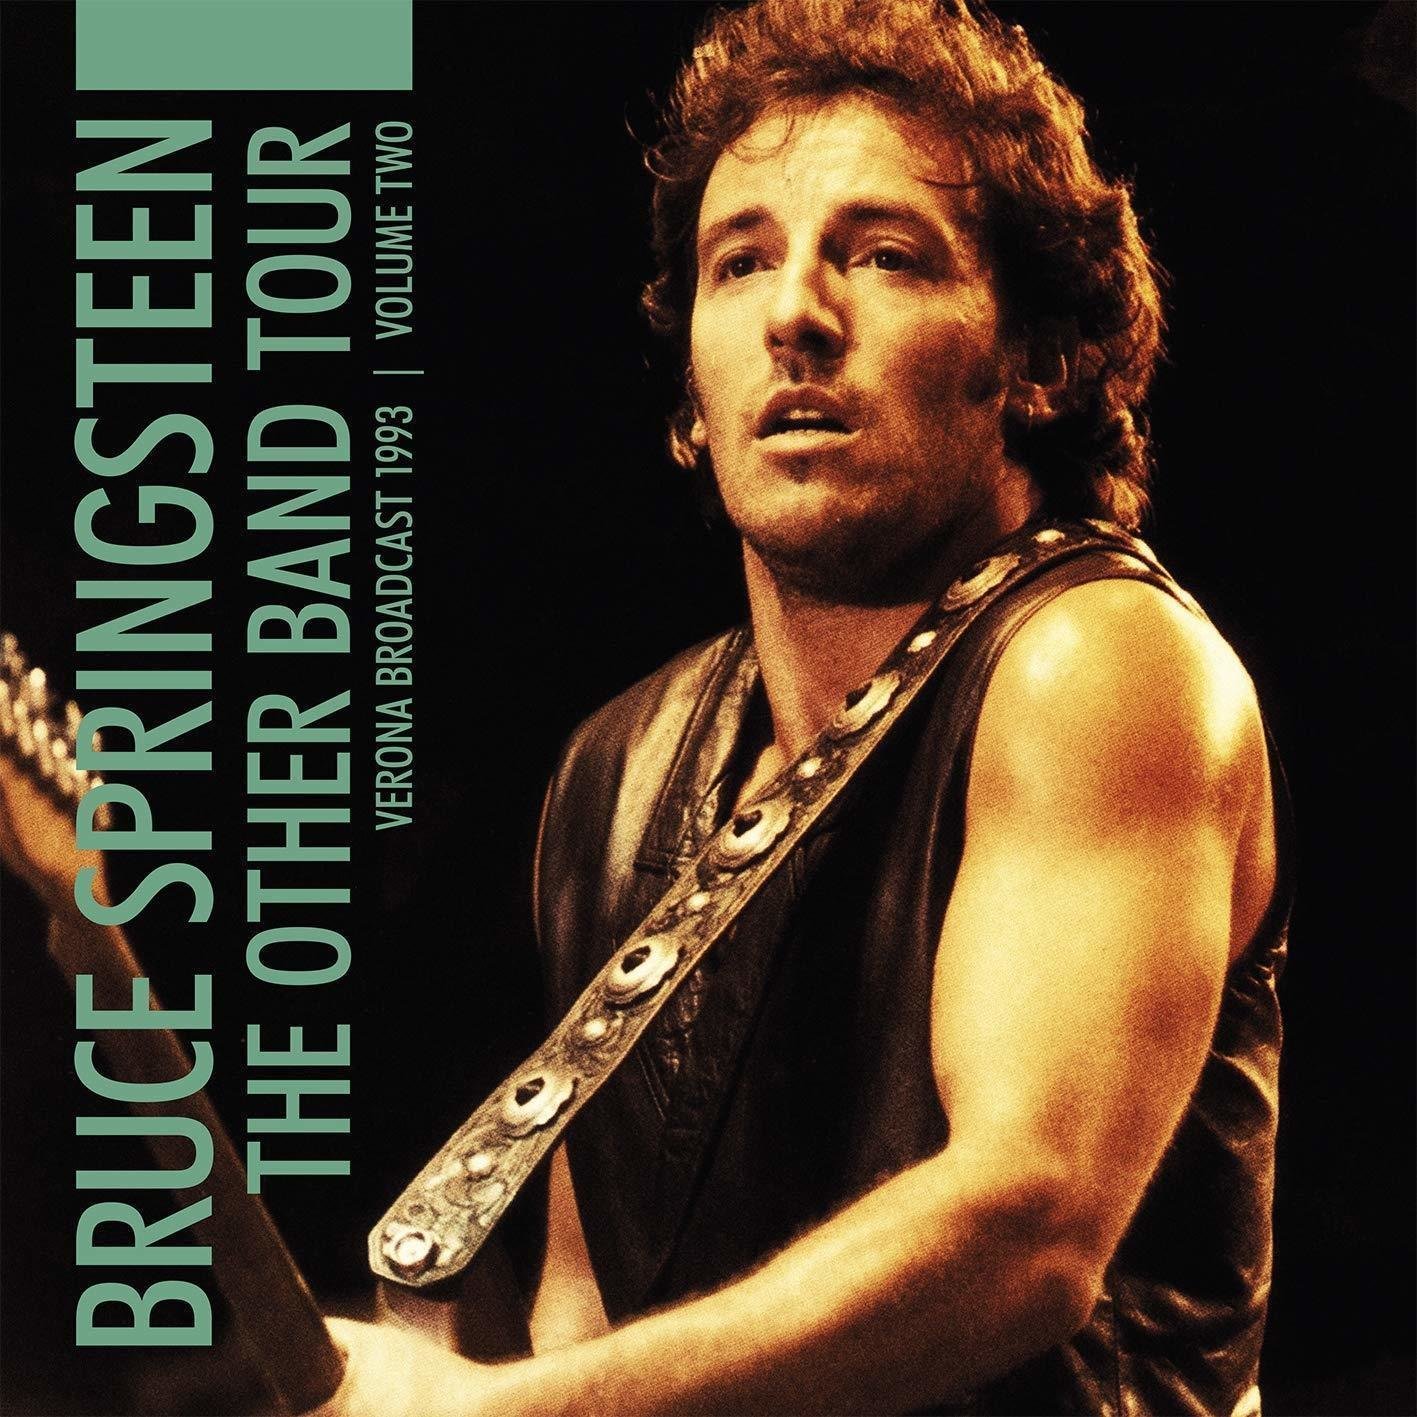 Disco in vinile Bruce Springsteen - The Other Band Tour - Verona Broadcast 1993 - Volume Two (2 LP)